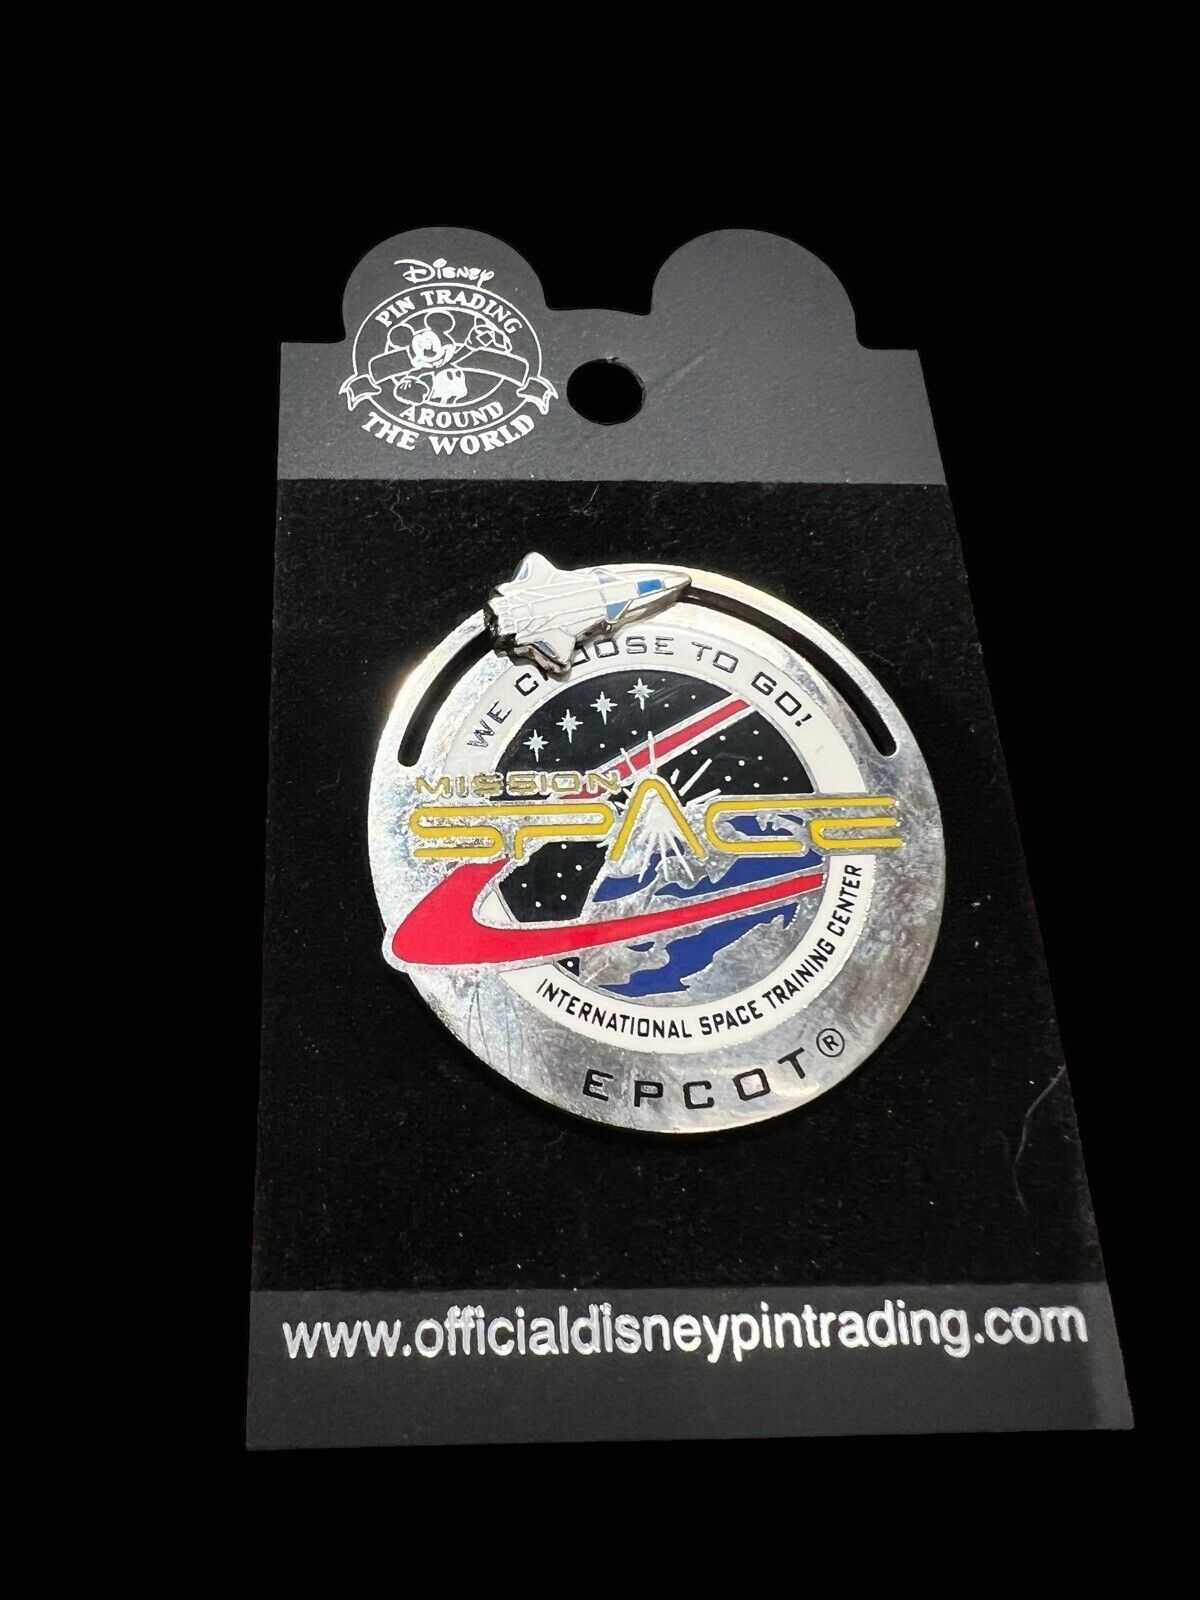 Mission Space International Space Training Center EPCOT 3D Slider Disney Pin